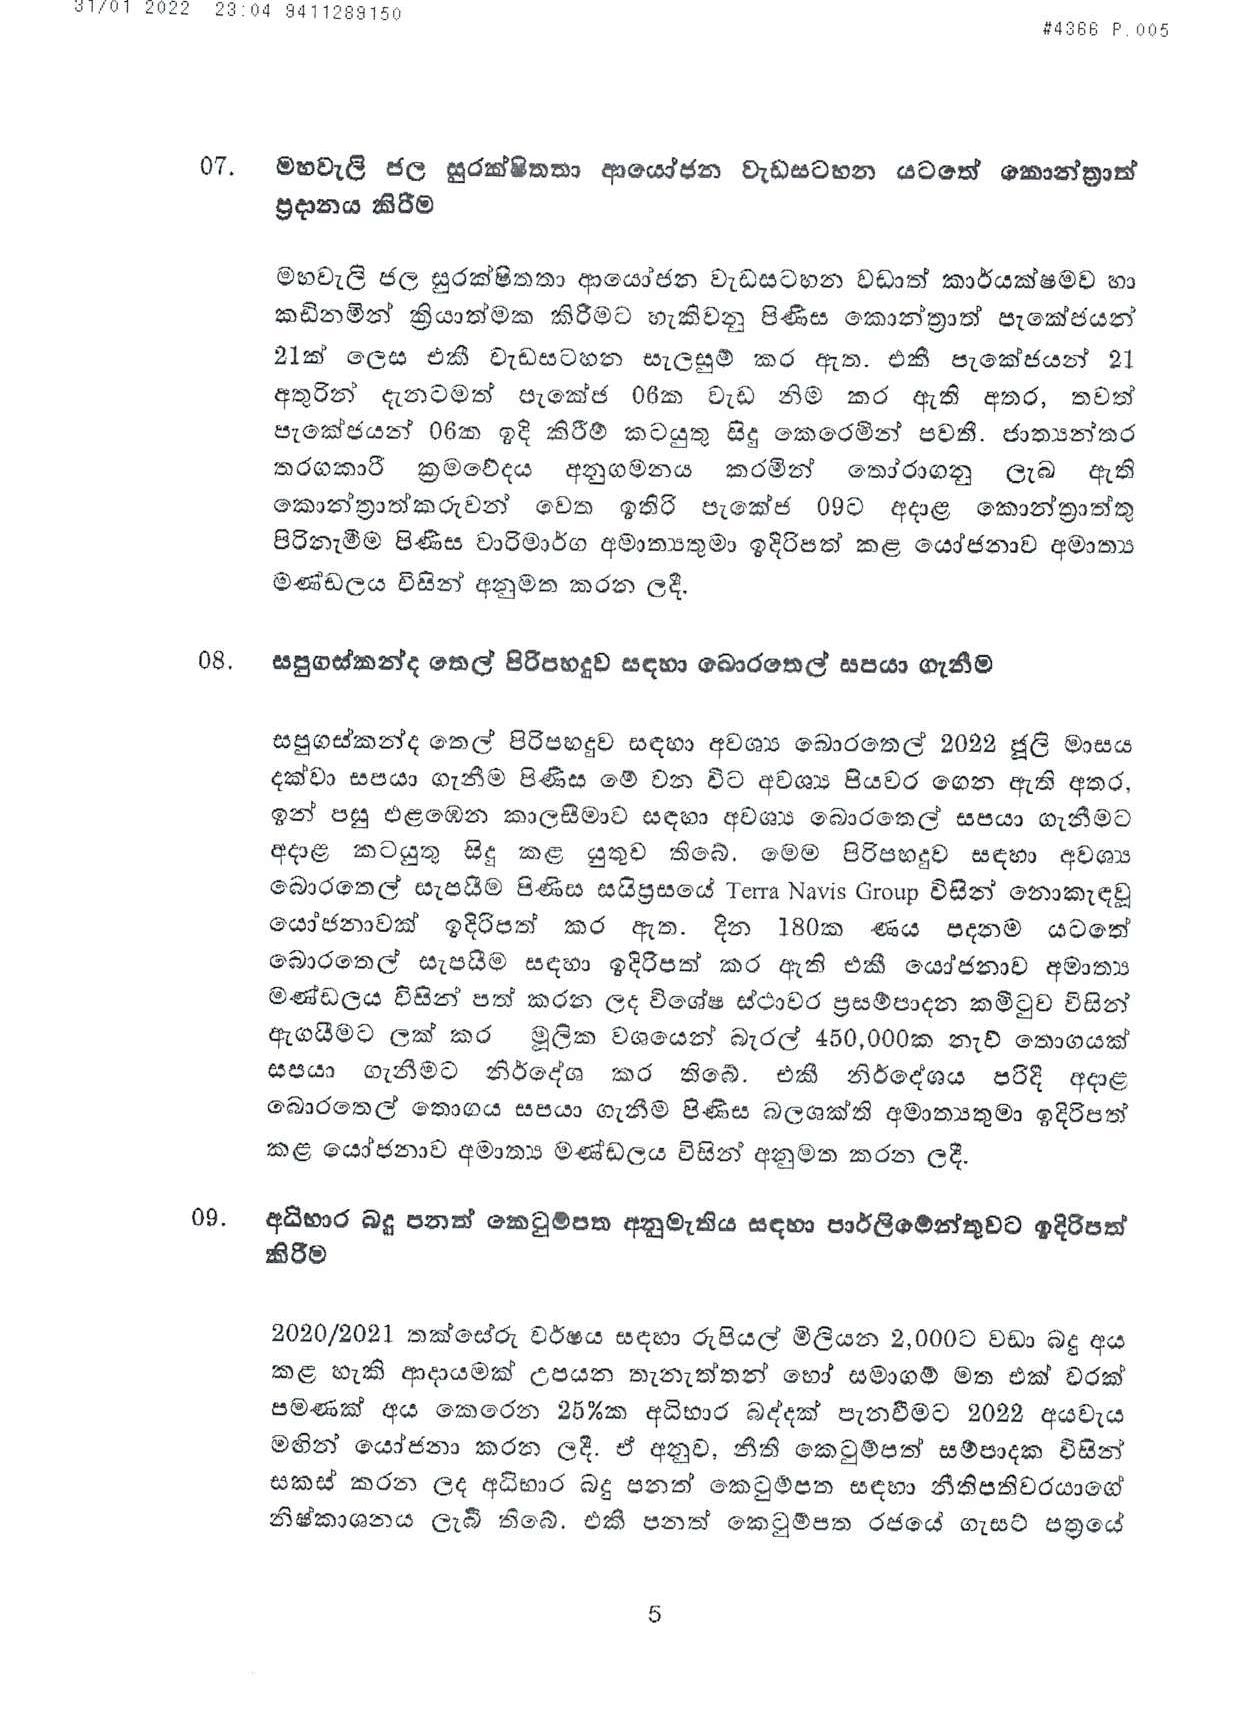 Cabinet Decision on 31.01.2022 page 005